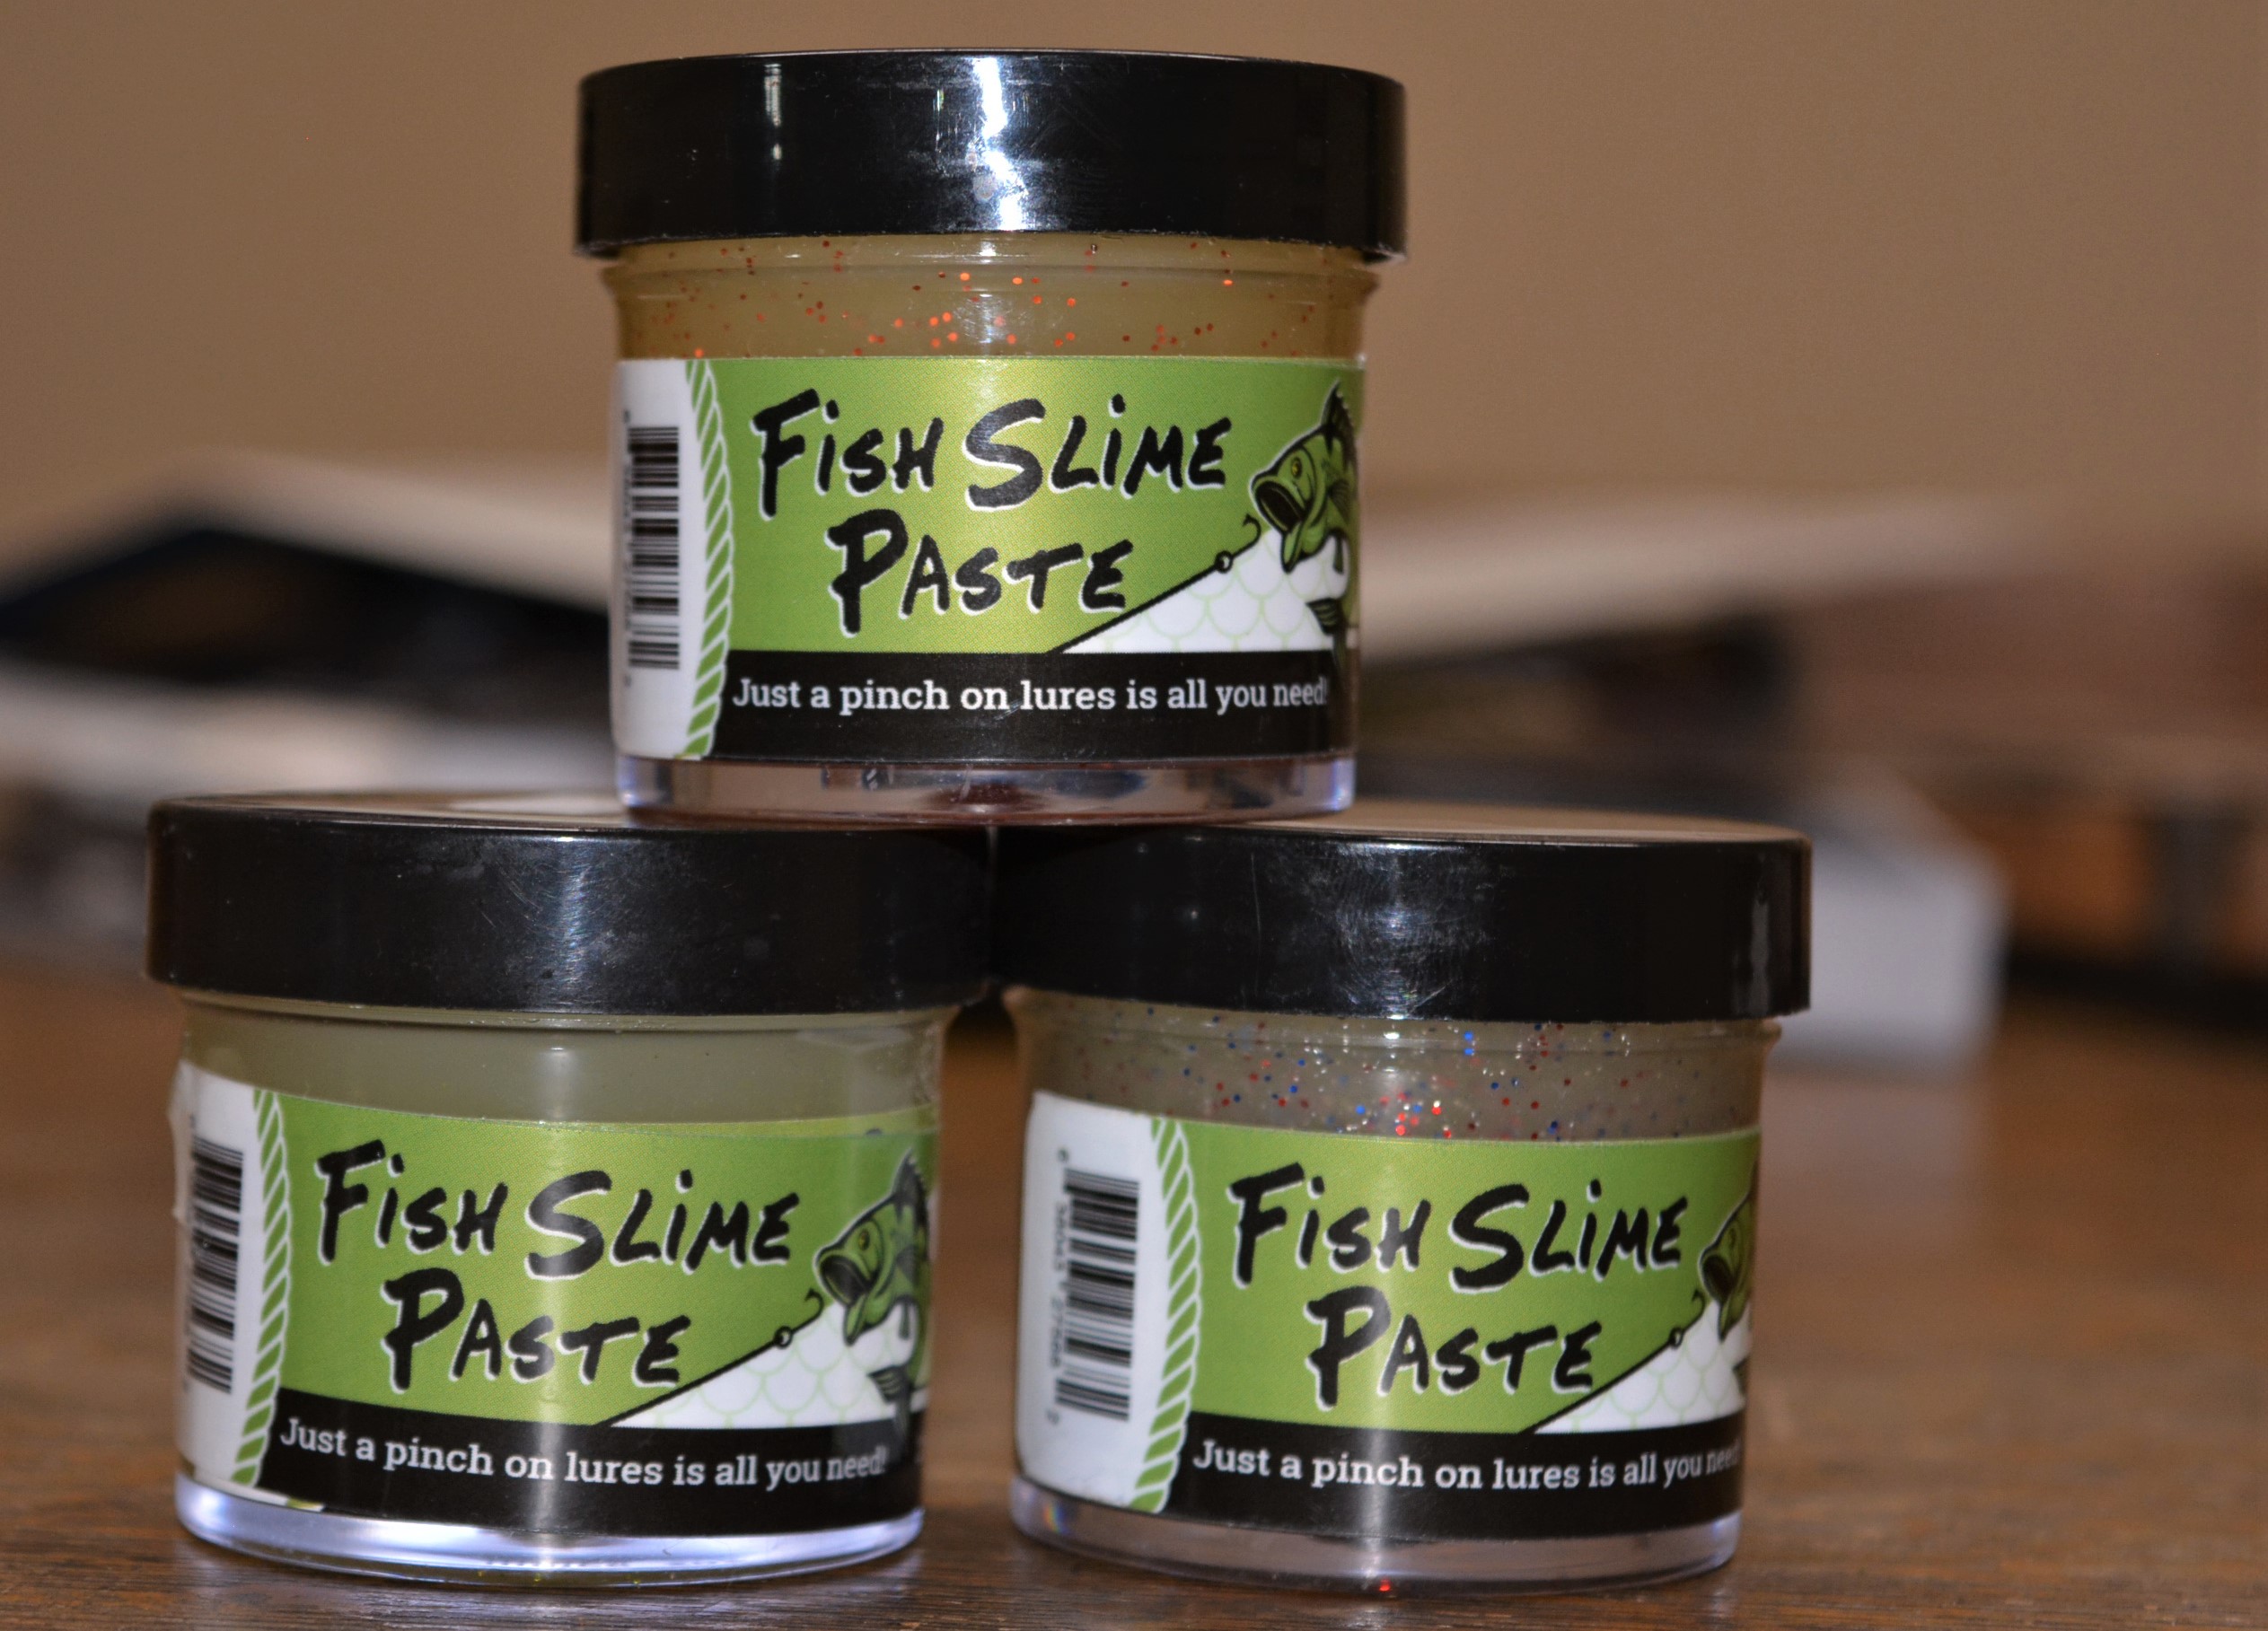 Fish Slime Paste is available at three local stores and online. Photo by C.J. Carnacchio